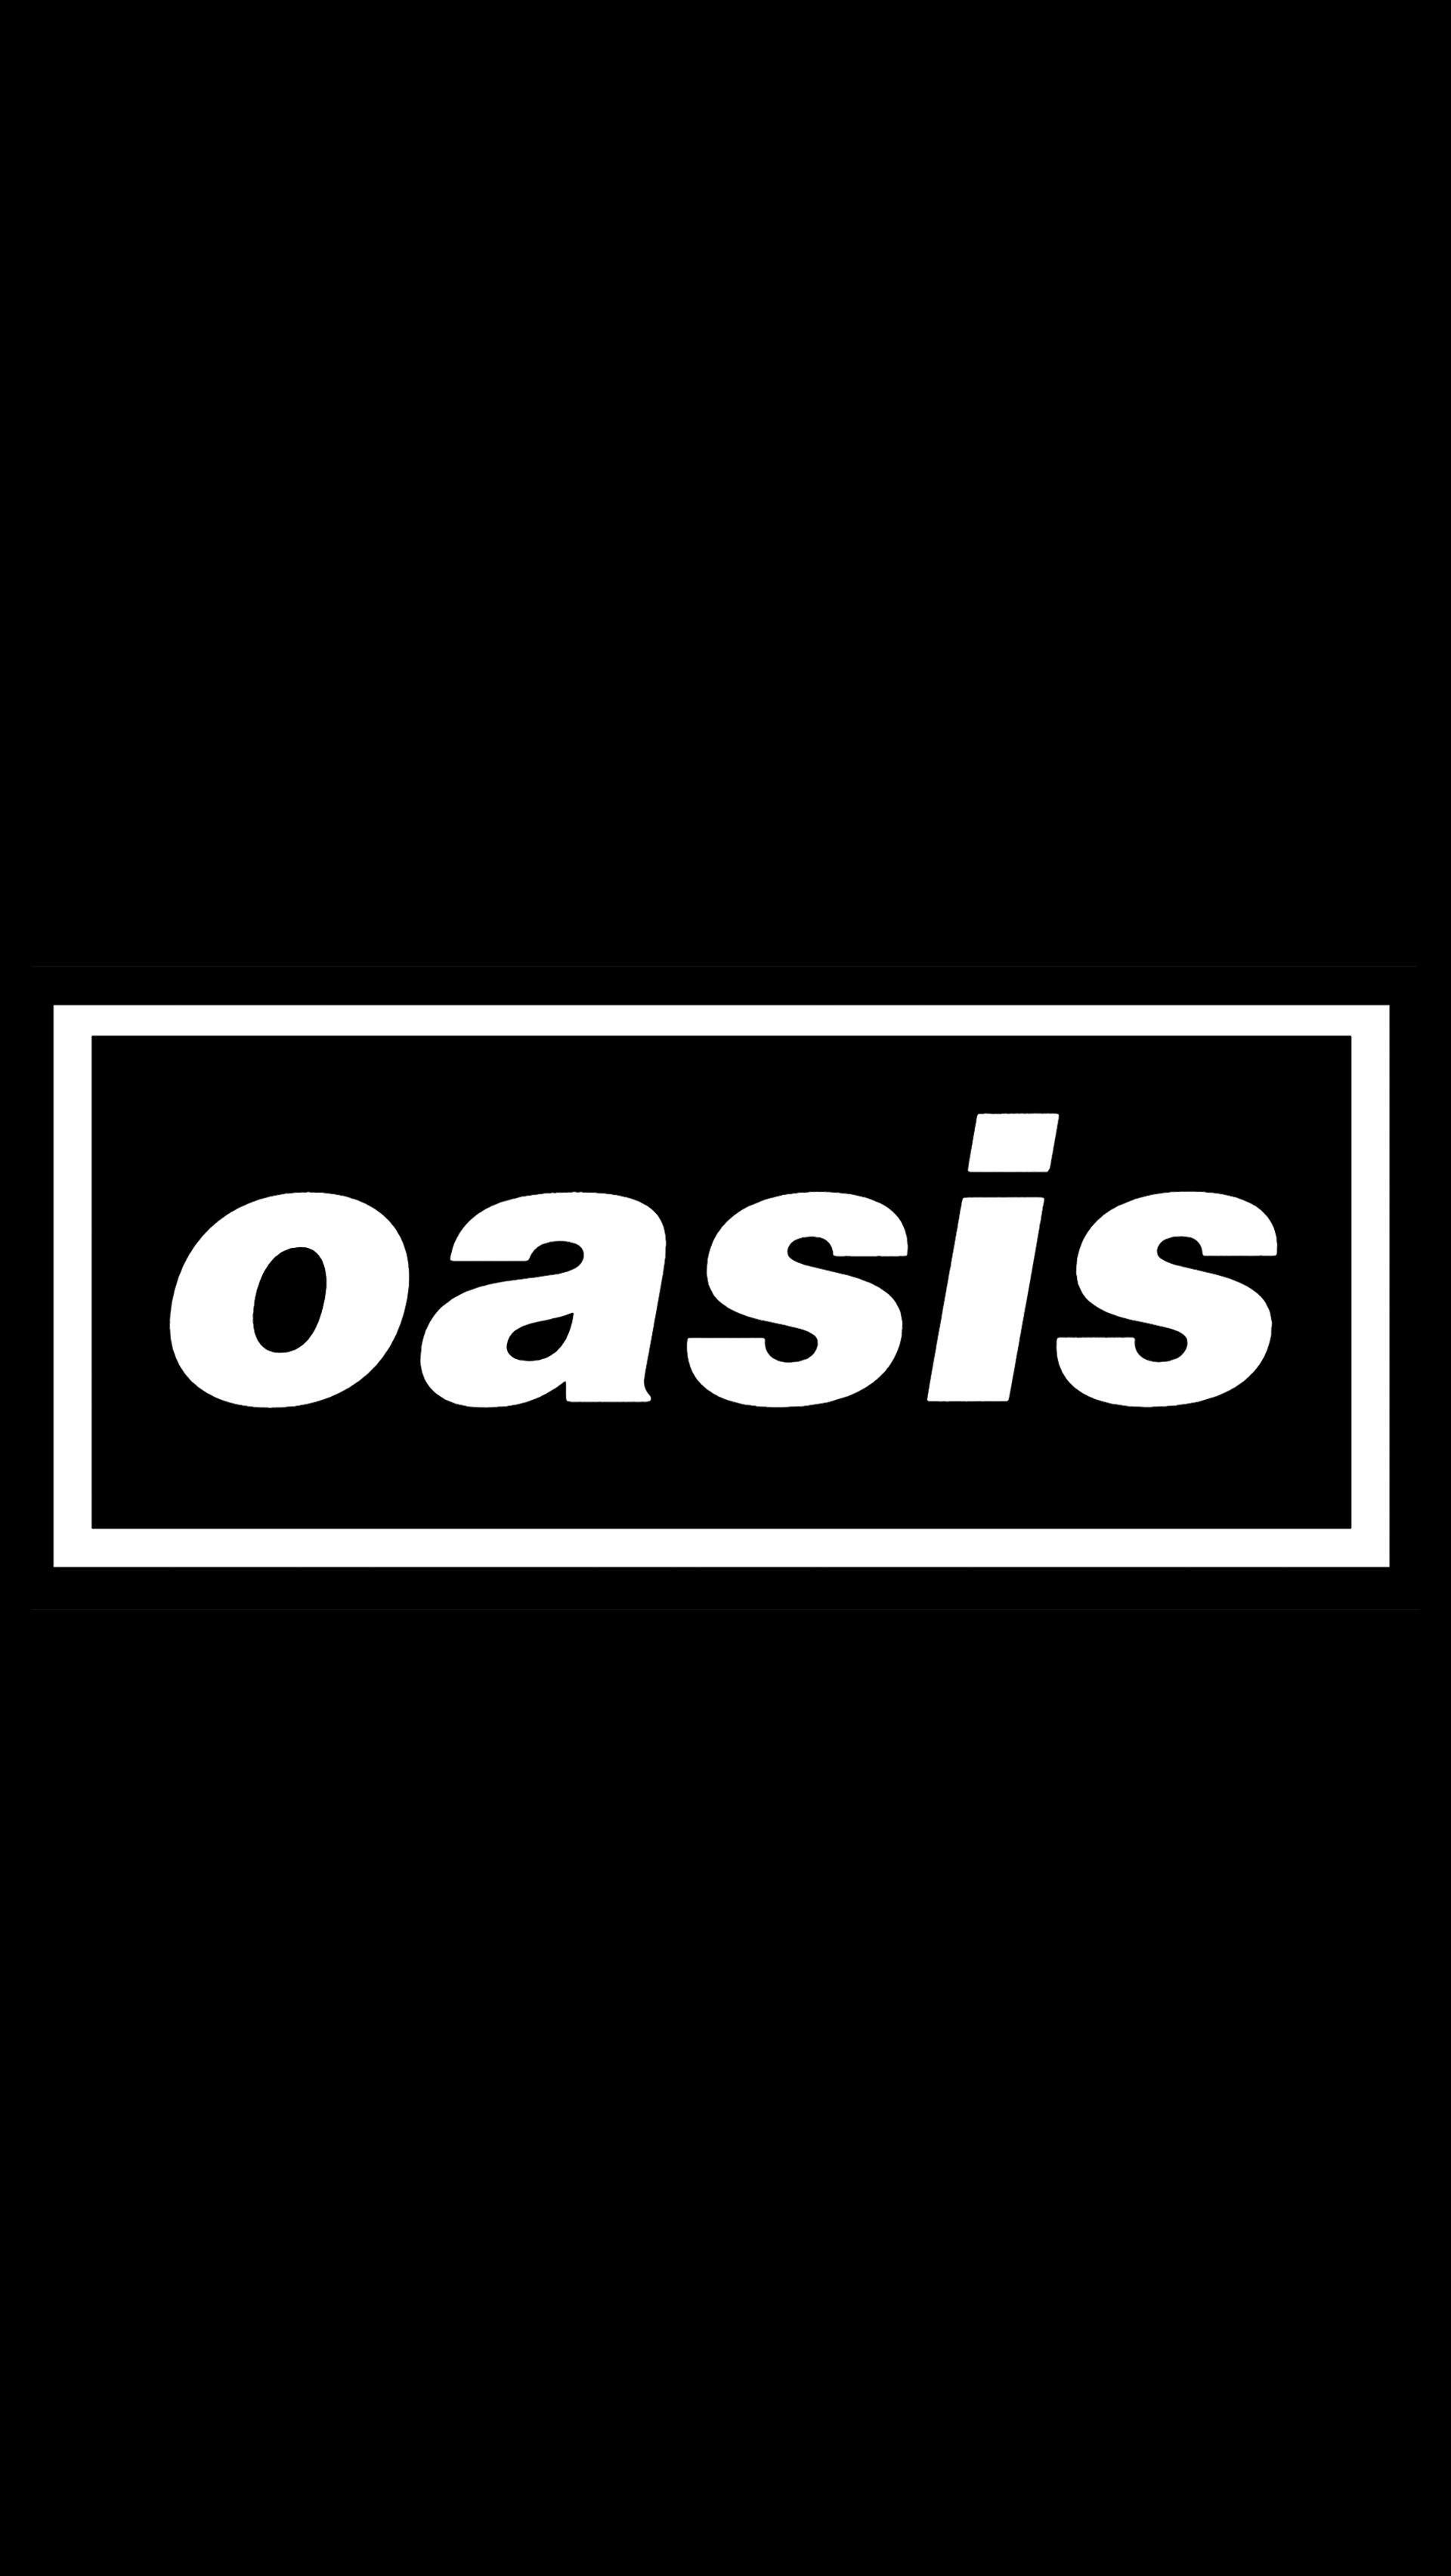 Oasis Android Wallpapers  Wallpaper Cave